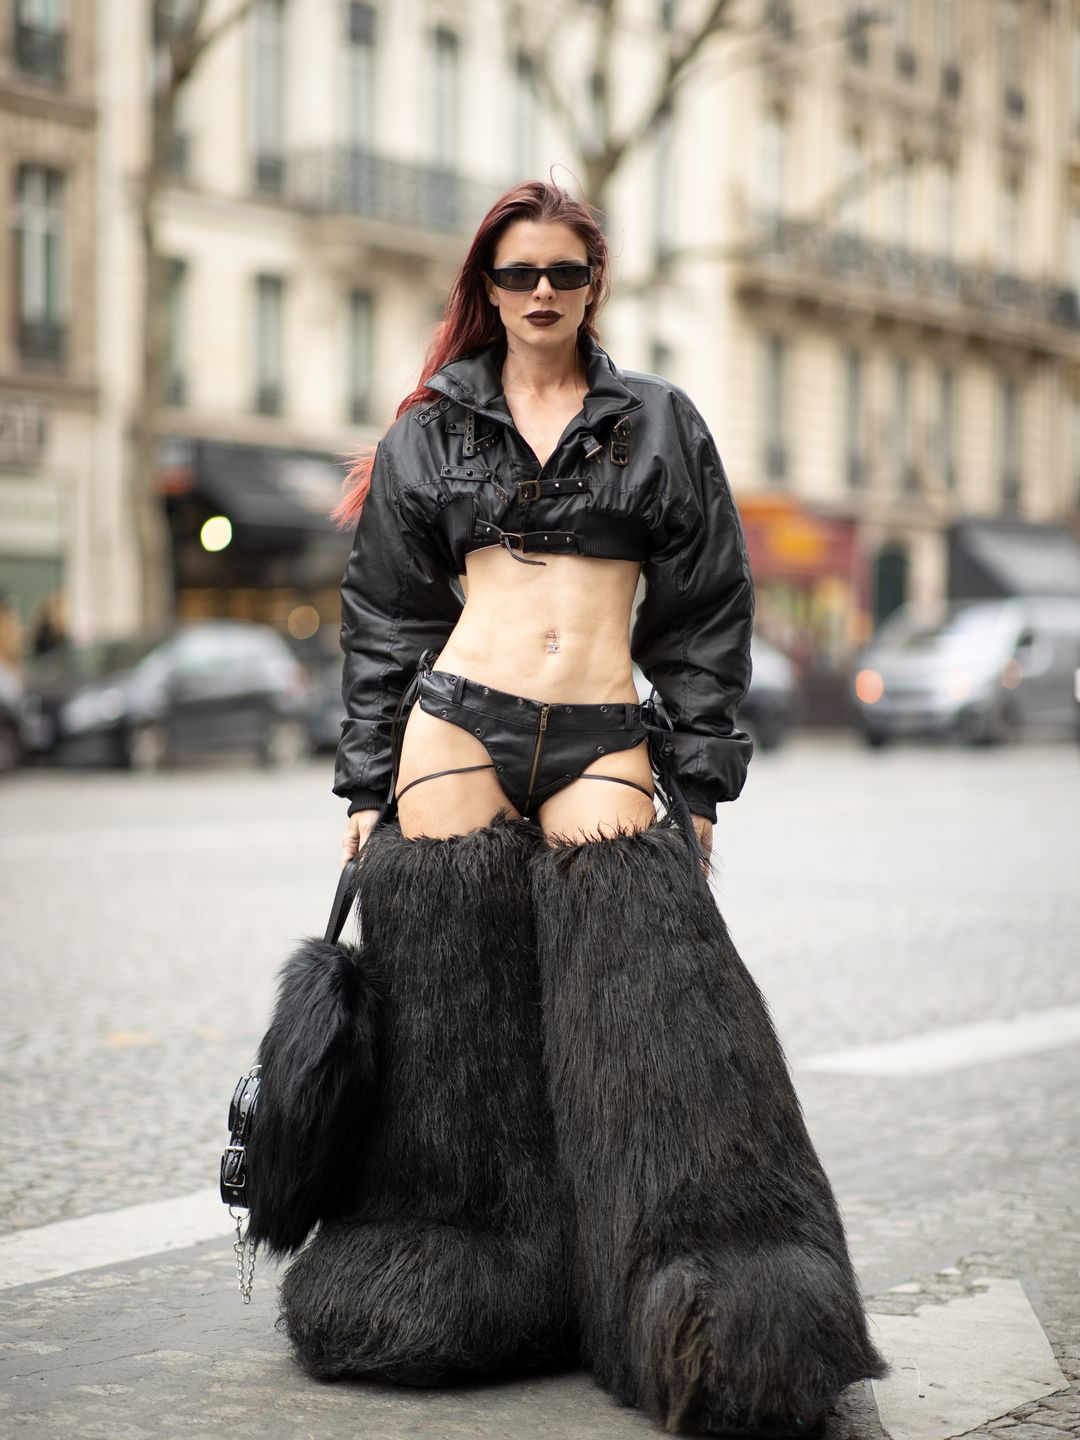 Now this is what we call a street-style look